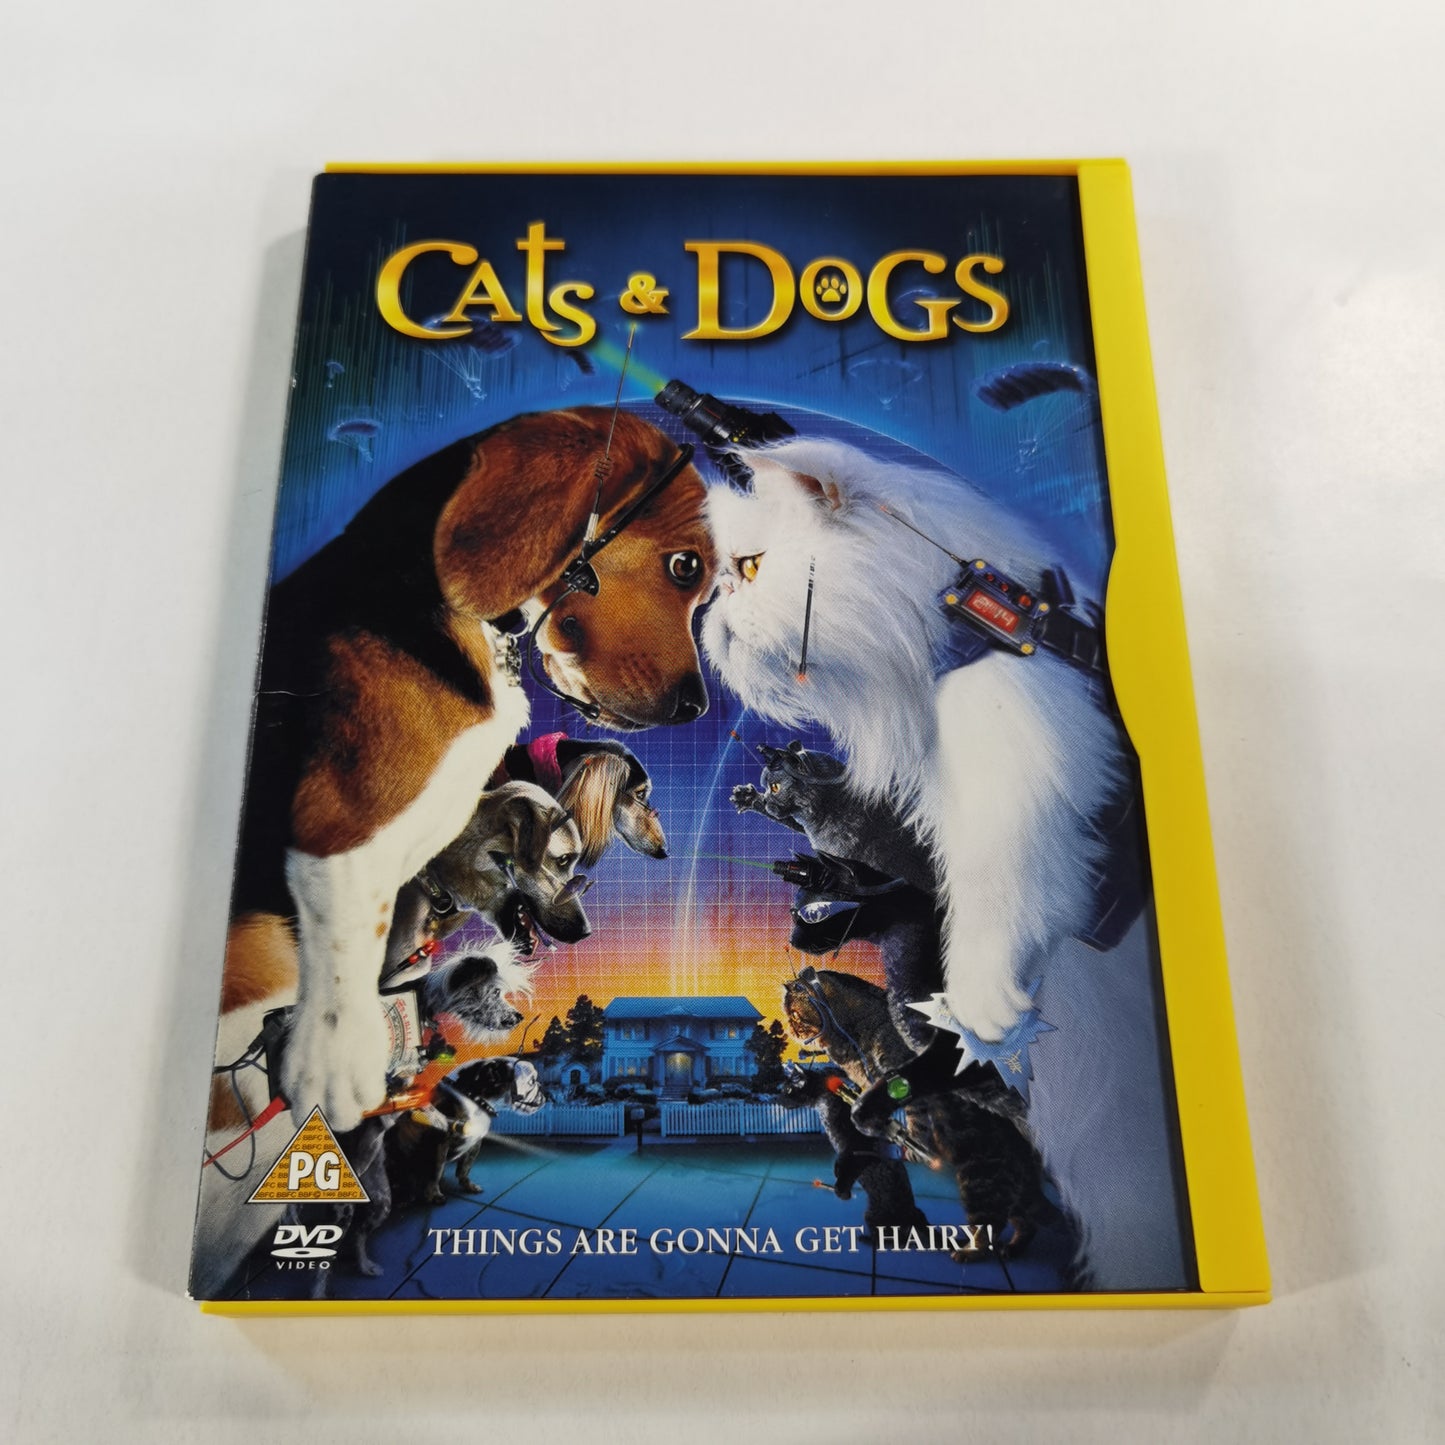 Cats & Dogs (2001) - DVD UK 2001 Snap Case